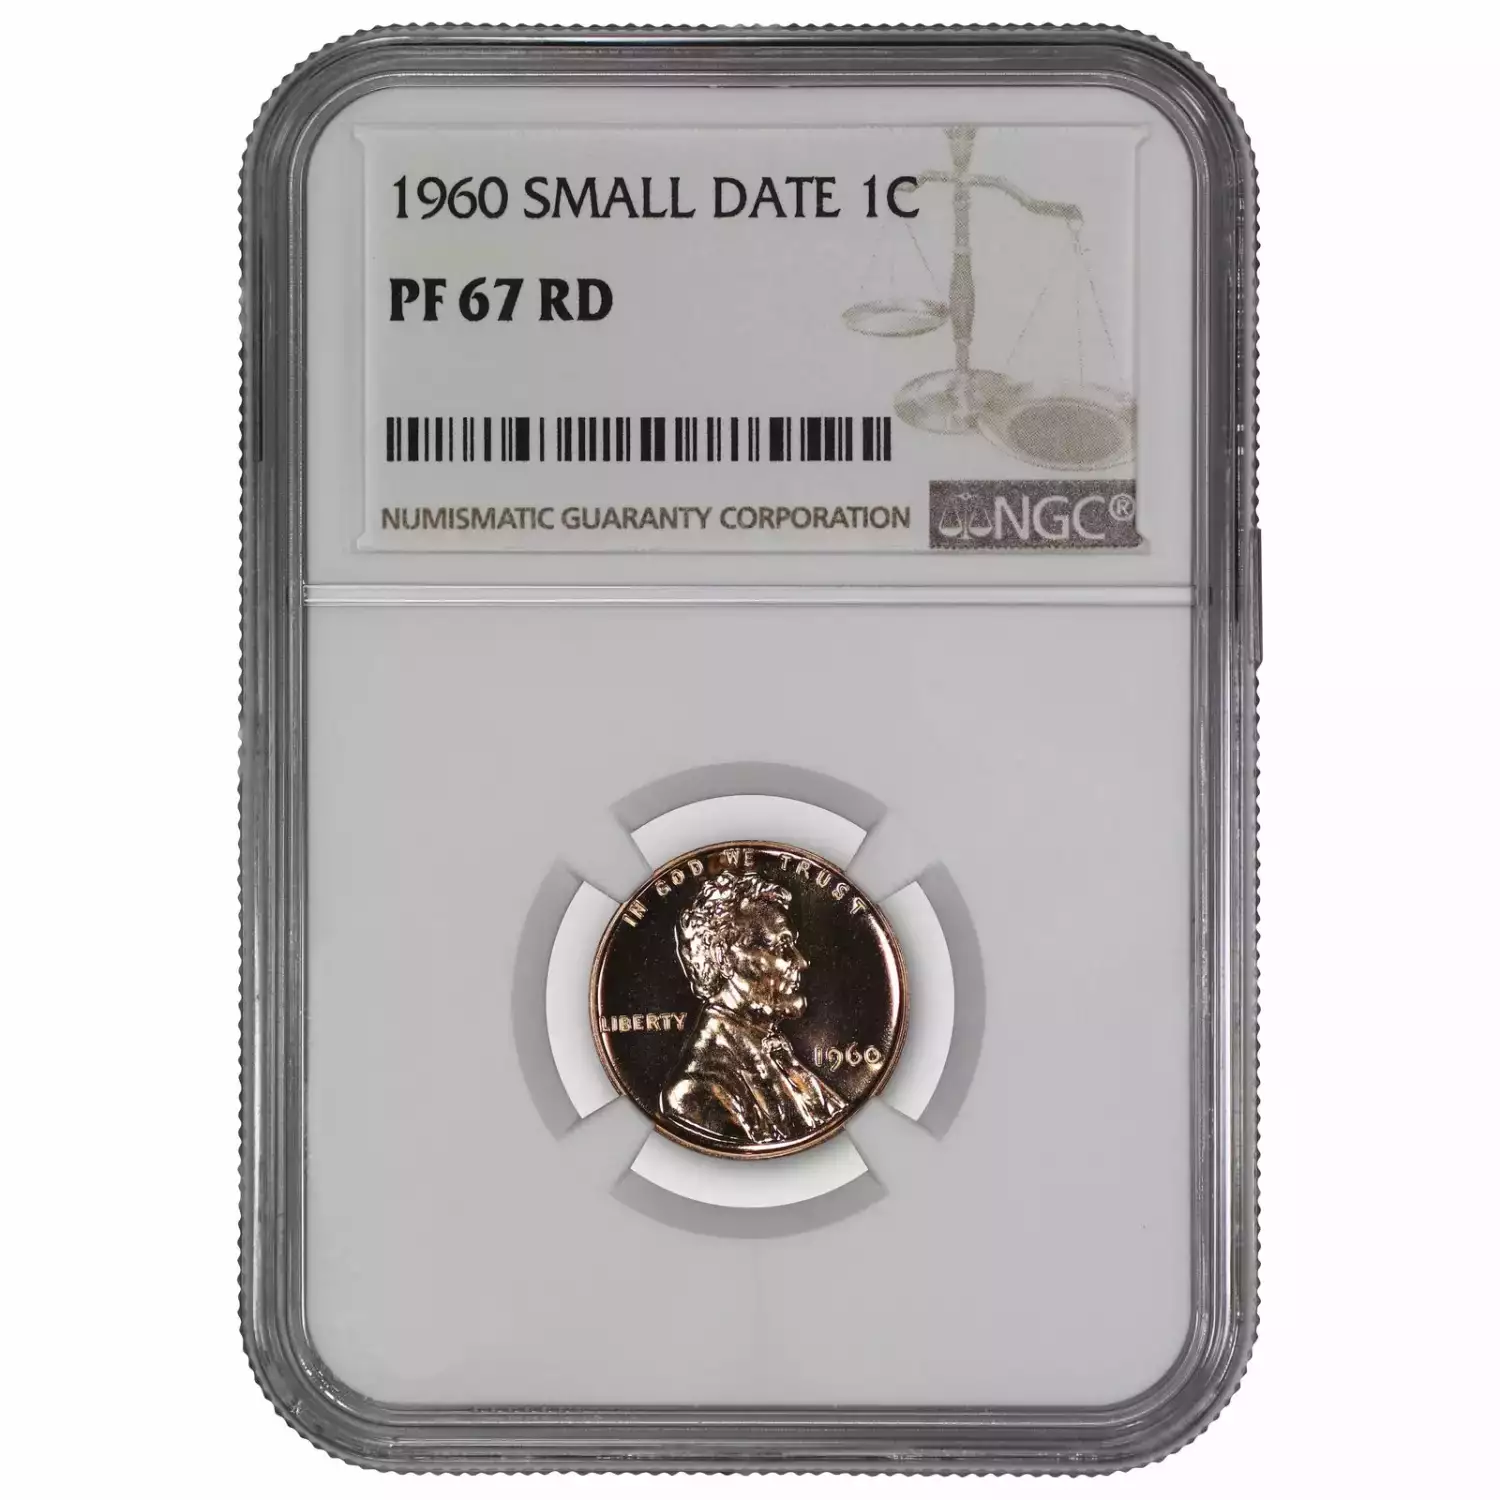 1960 SMALL DATE PROOF LINCOLN MEMORIAL CENT PENNY 1C NGC CERTIFIED PF 67 RD (5)